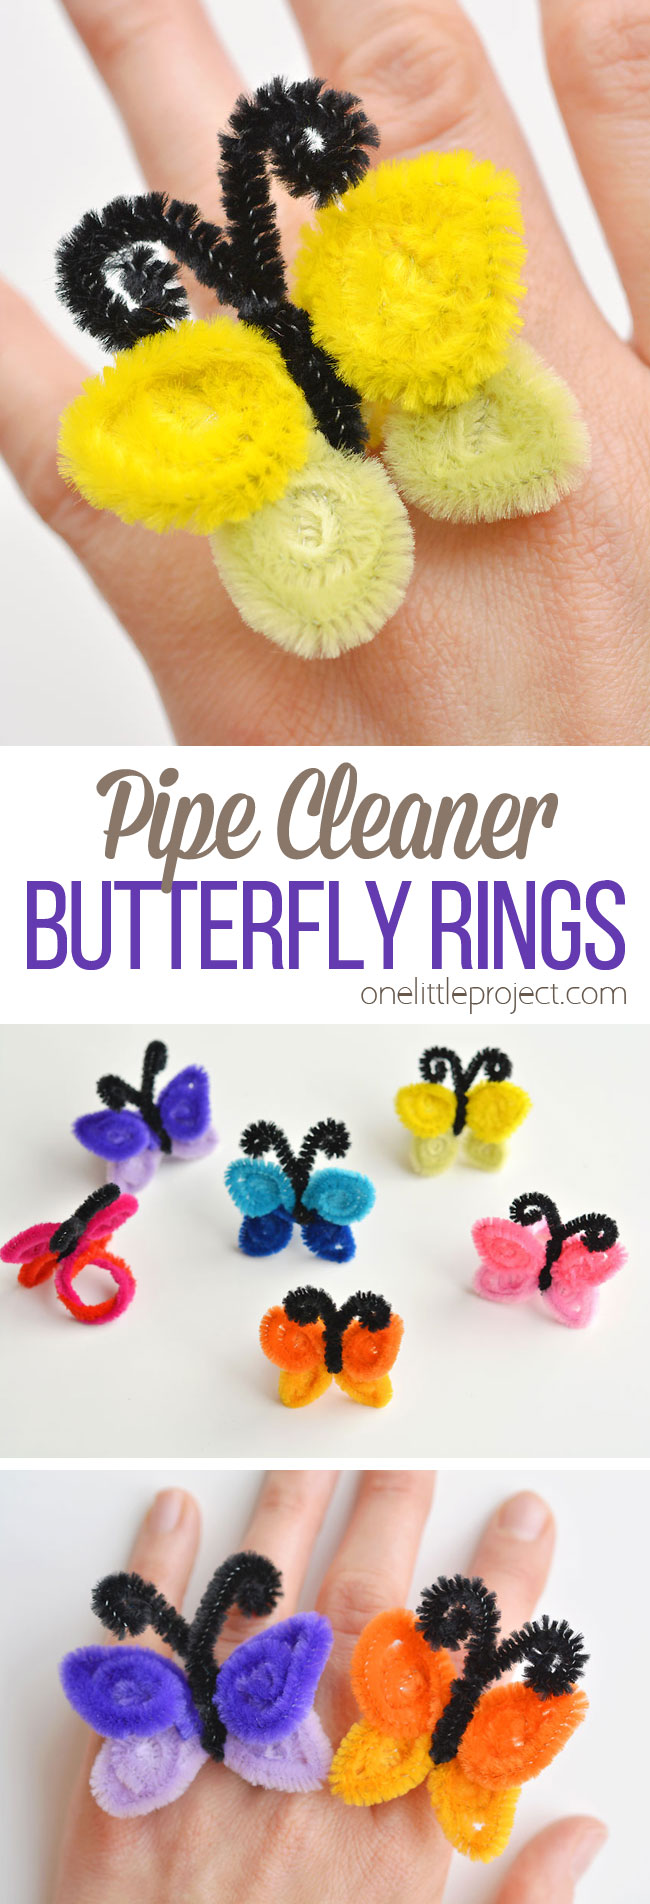 These pipe cleaner butterfly rings are SO SIMPLE to make and they’re so pretty! This is such a fun and easy kids craft idea and a super fun summer craft. It's also a great craft for teens, tweens and even adults! All you need are a few pipe cleaners and in less than 5 minutes you can make an awesome homemade ring!